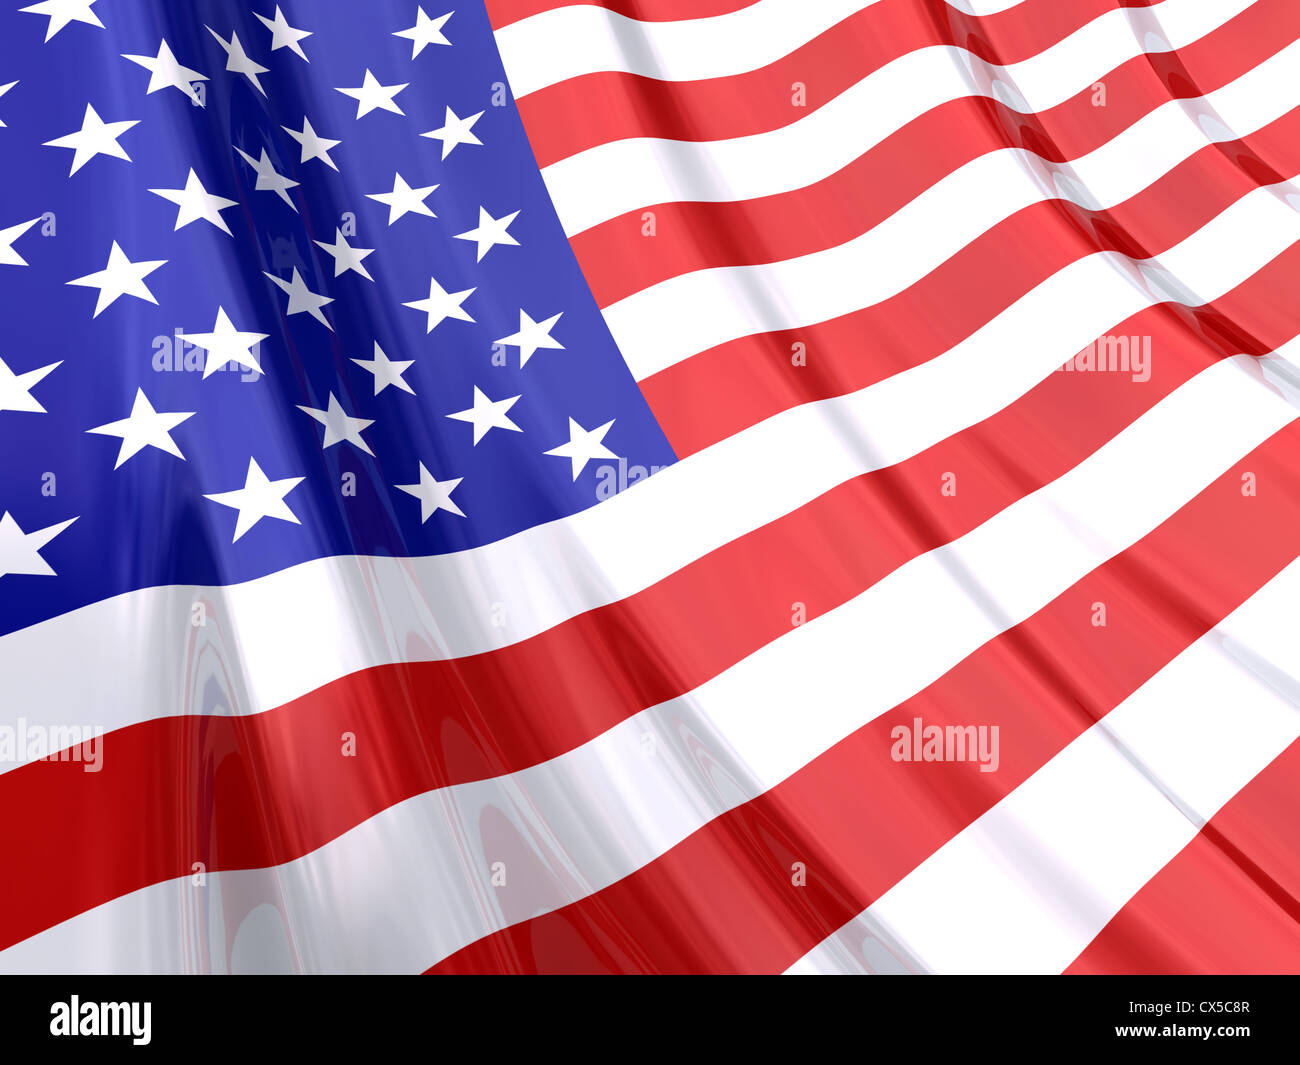 Glossy flag of United States of America. Stock Photo